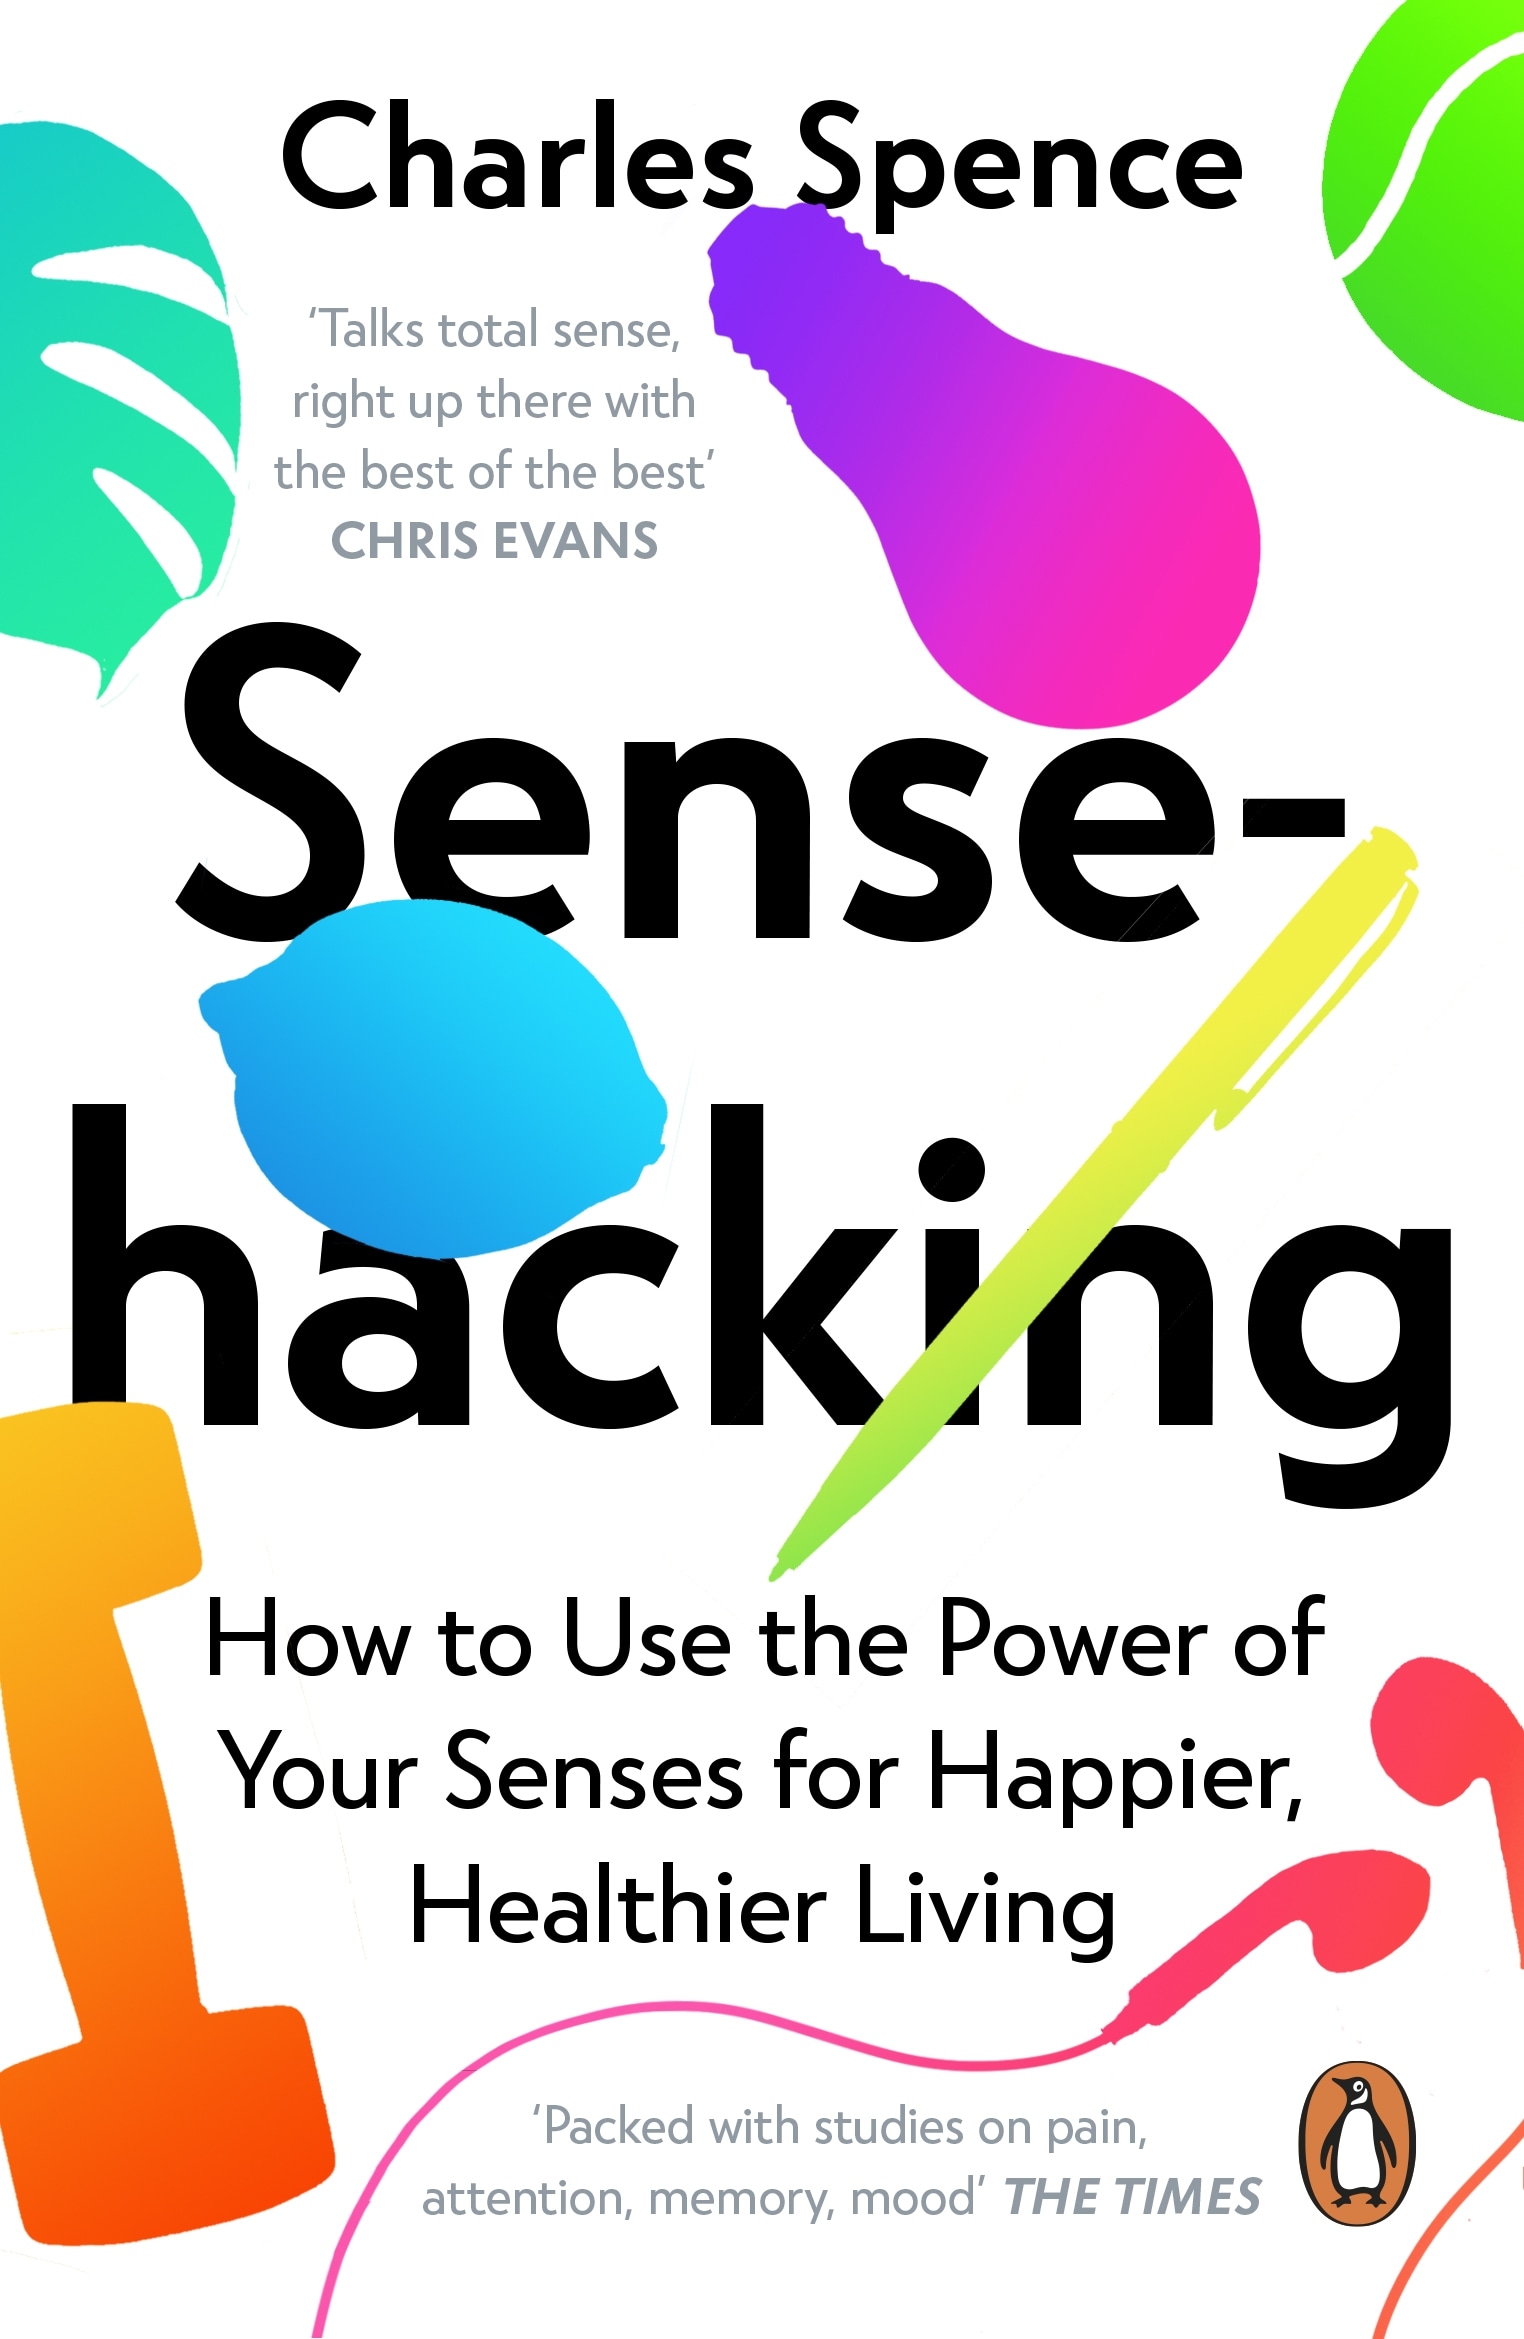 Book “Sensehacking” by Charles Spence — January 27, 2022